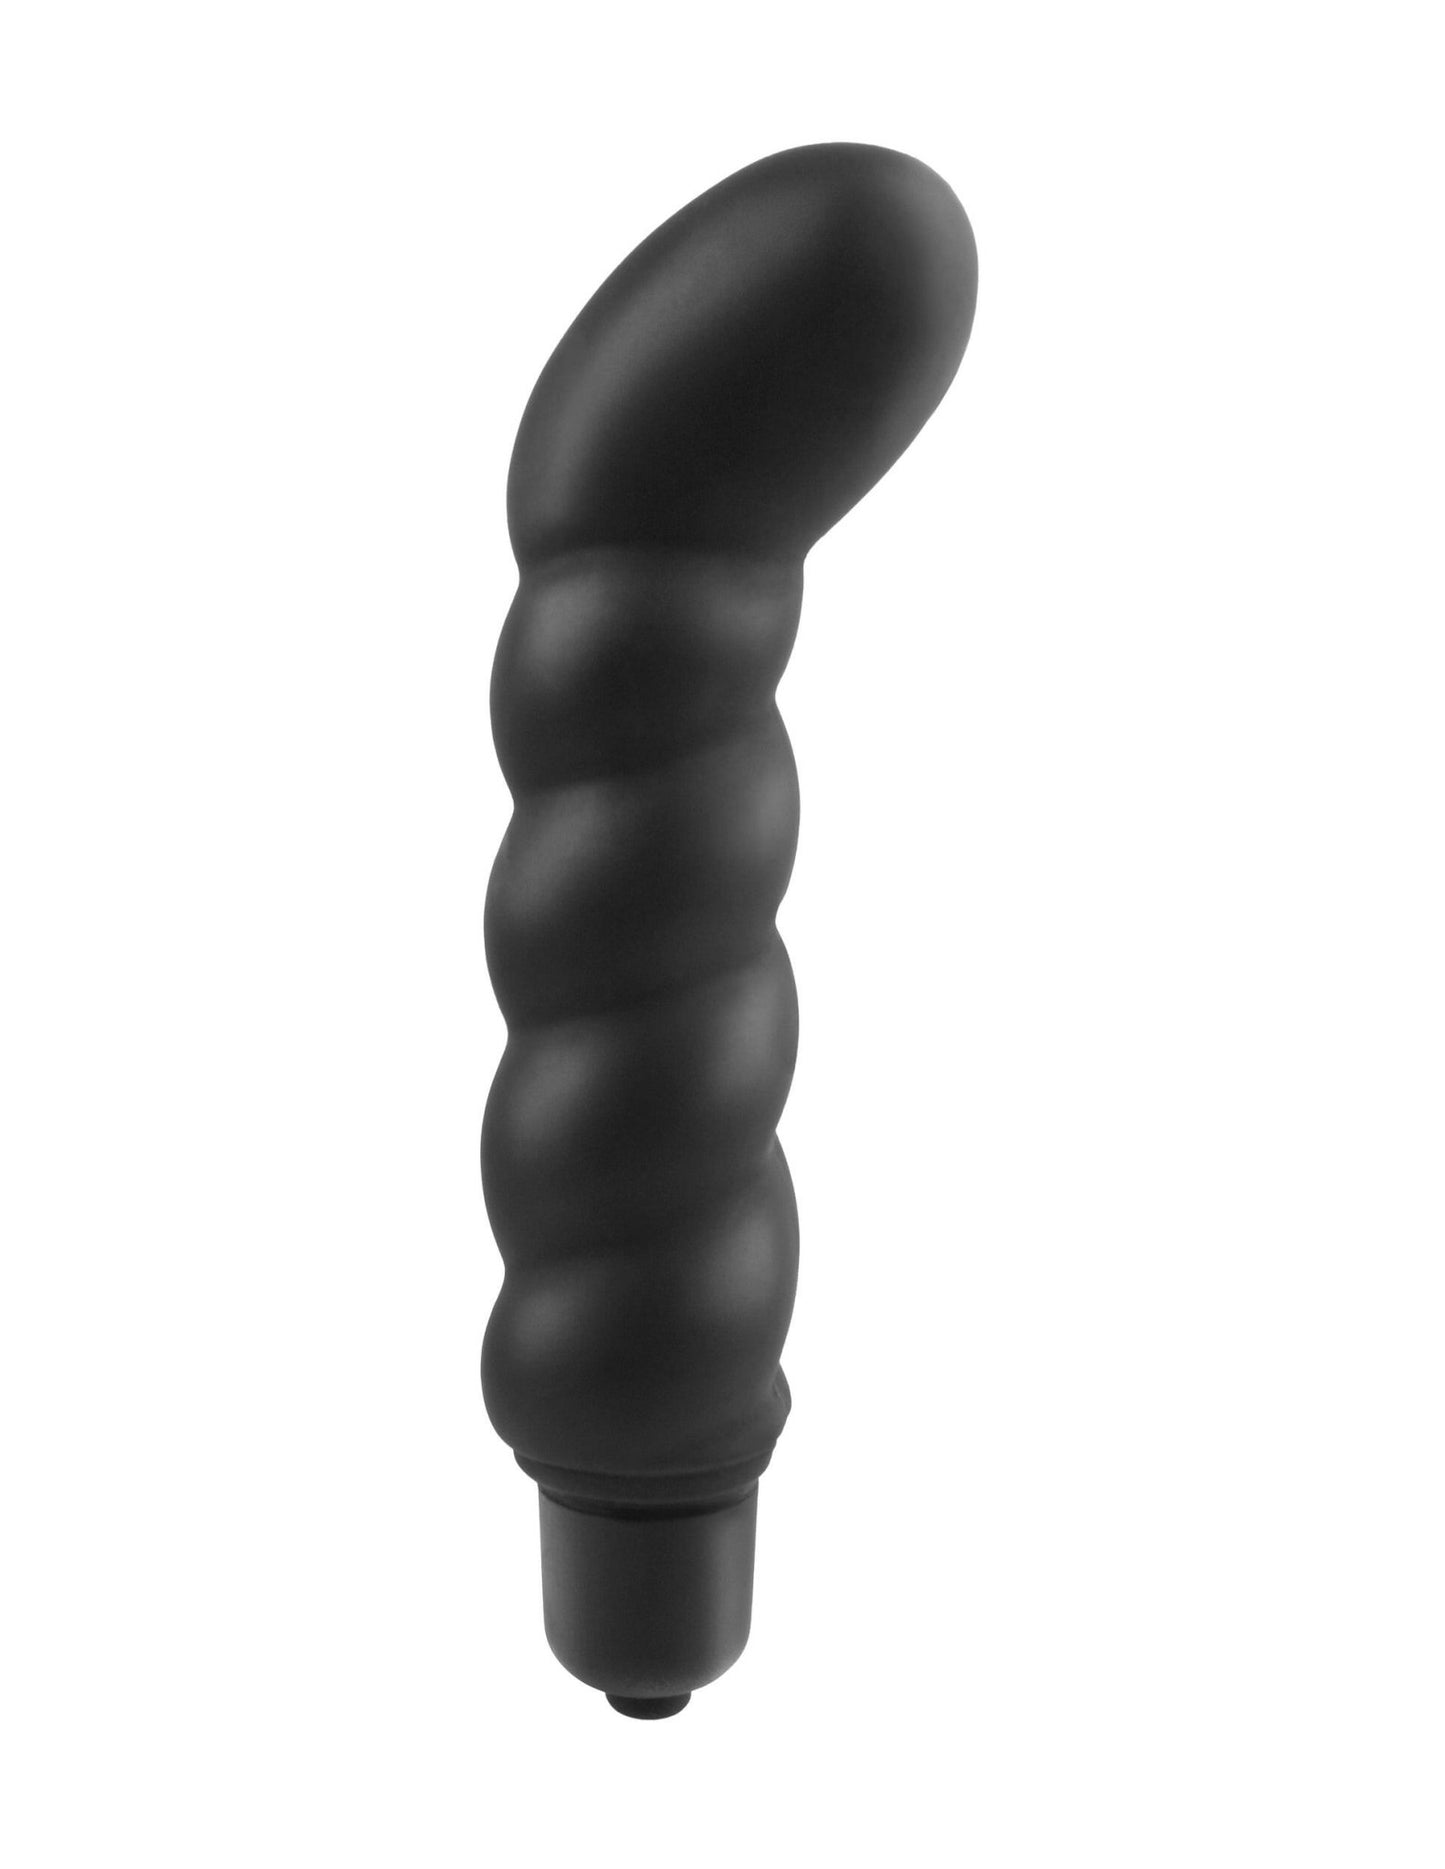 Anal Fantasy Collection Ribbed P-Spot Vibe - Black - TemptationsPipedreamTemptationsPD4631-23